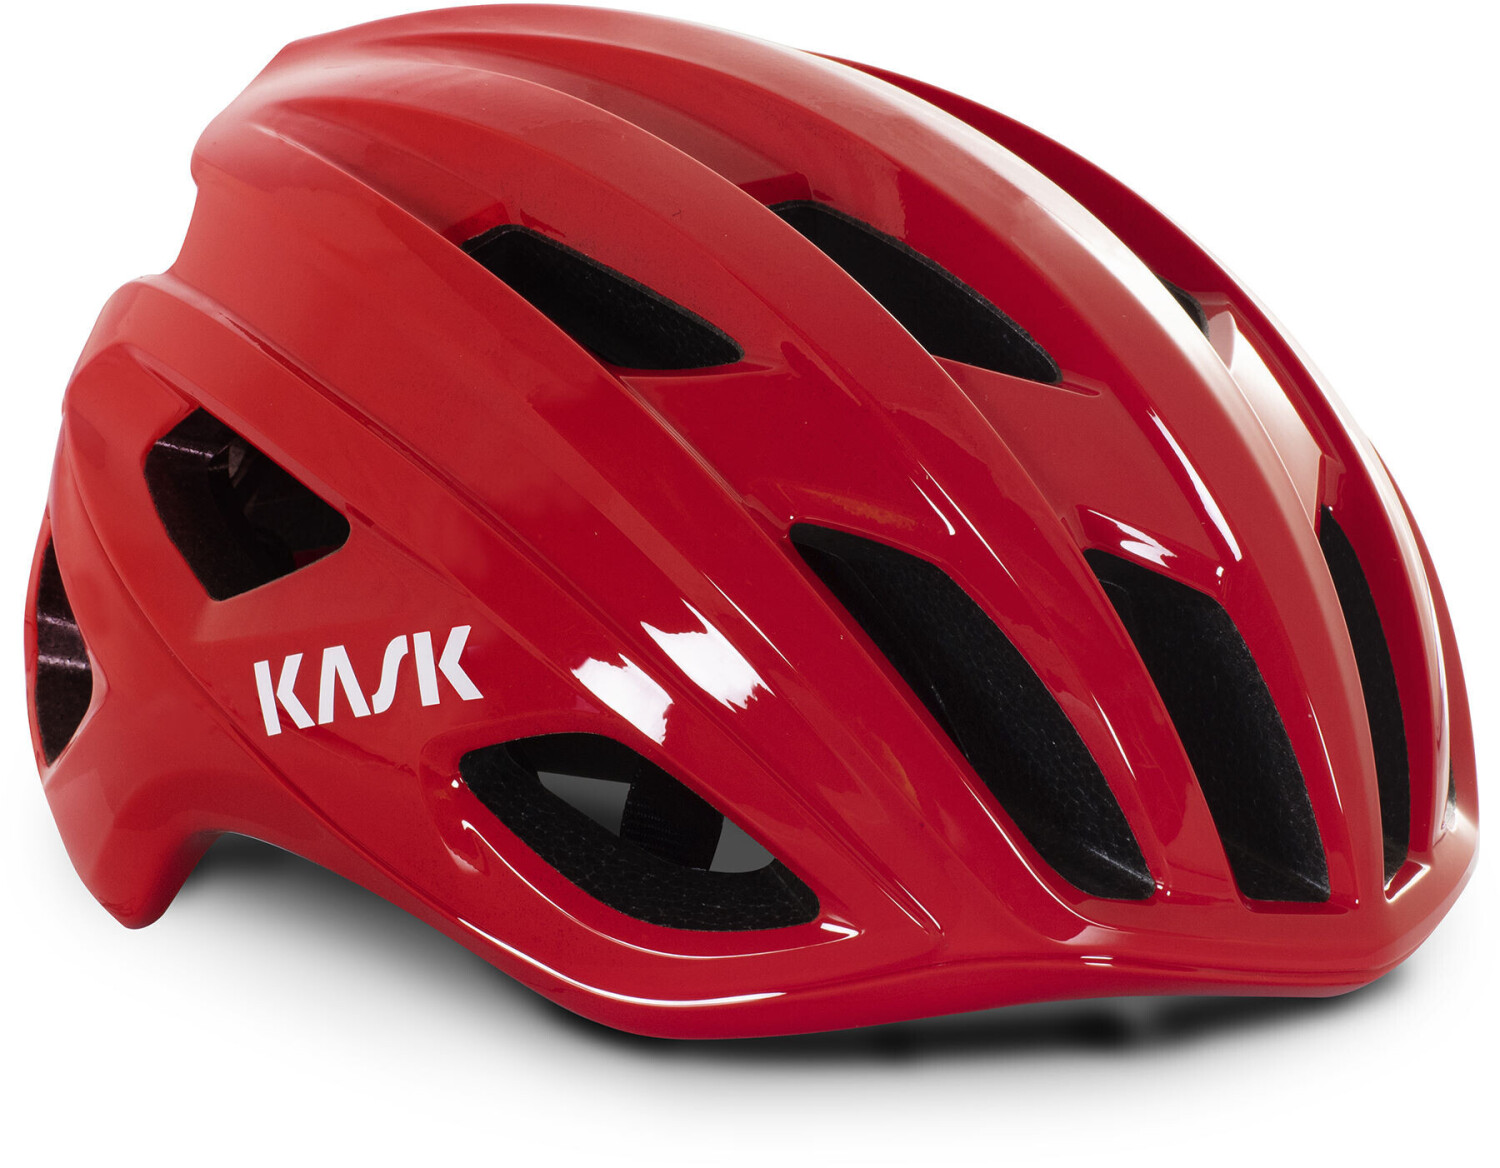 Kask Mojito Cubed WG11 red